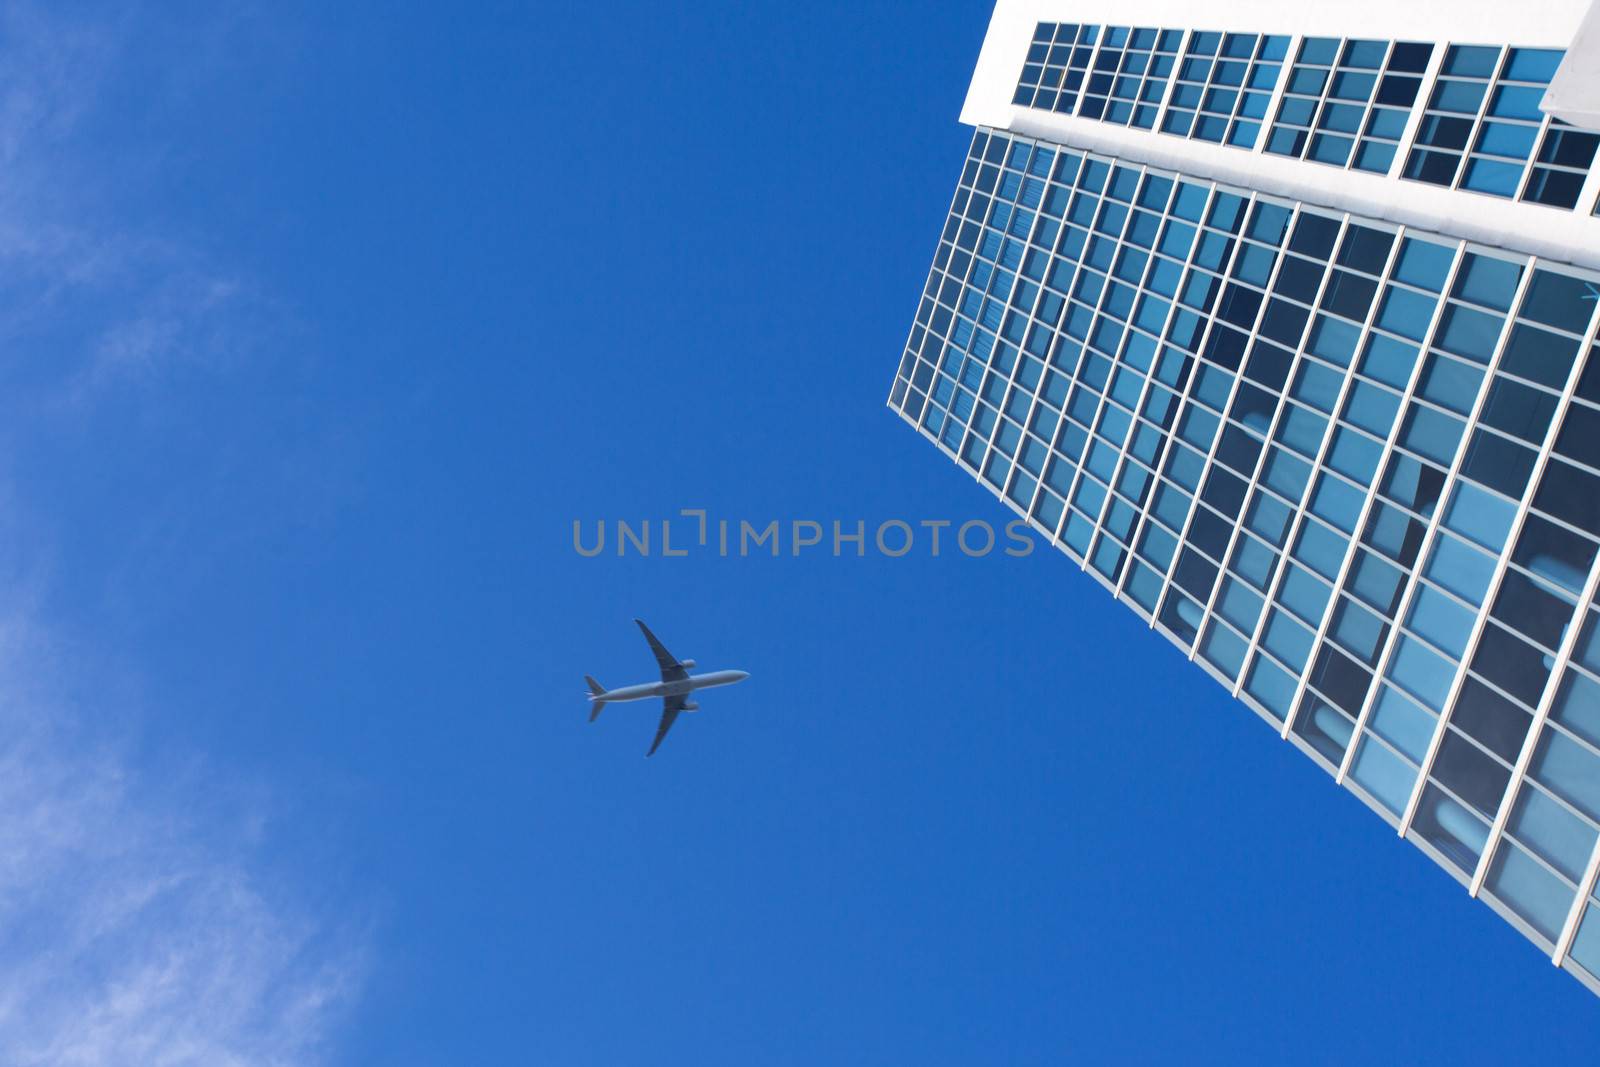 Airplane flying above a skyscraper by watchtheworld